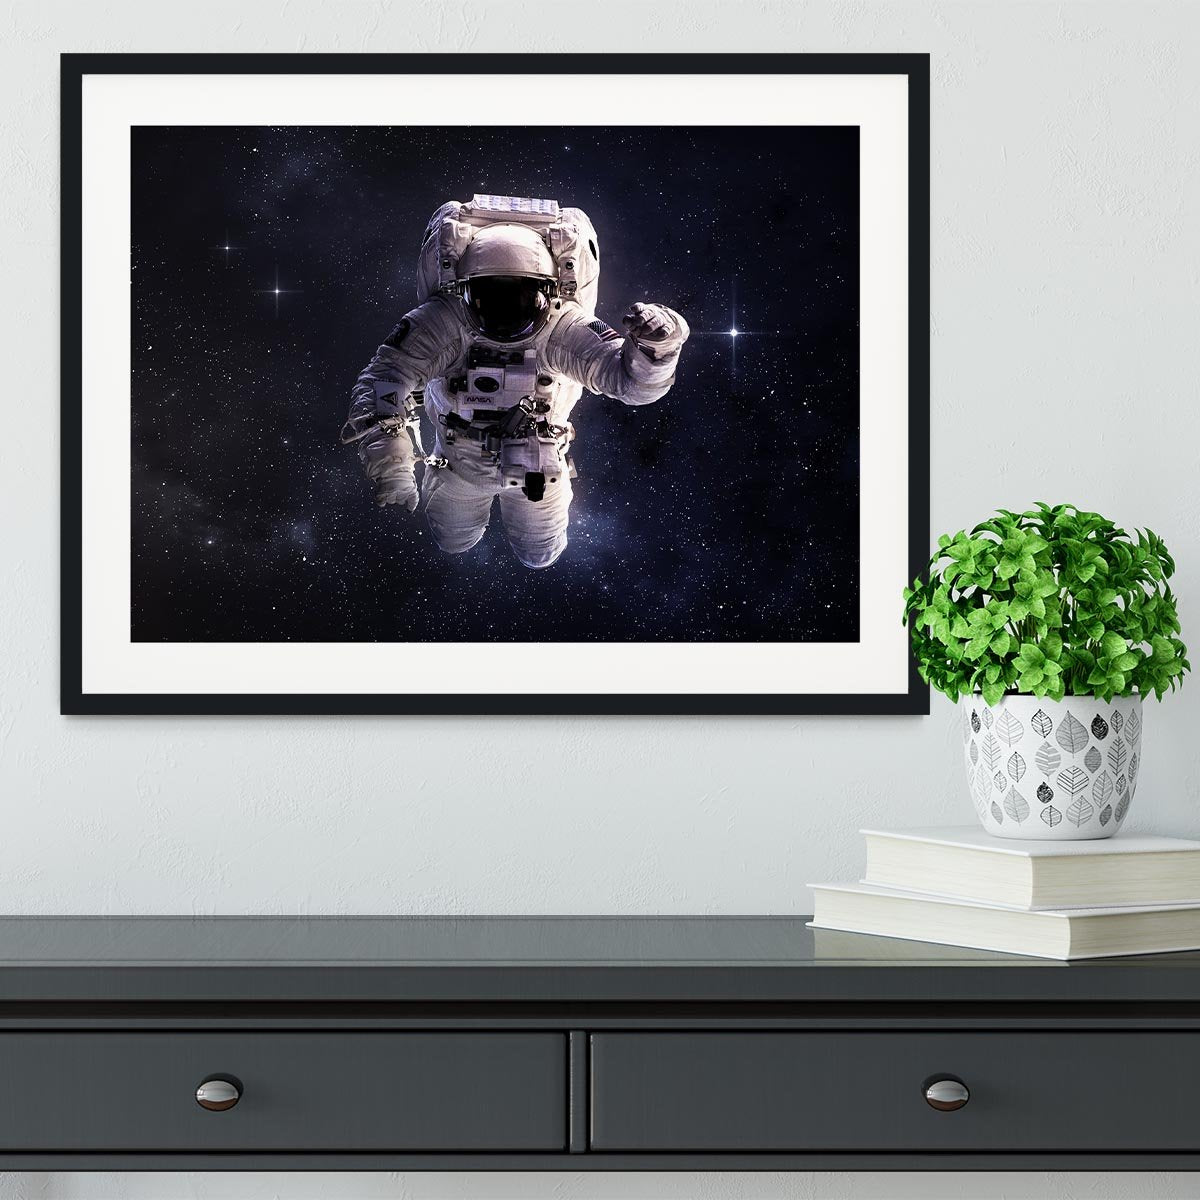 Astronaut in outer space with stars Framed Print - Canvas Art Rocks - 1